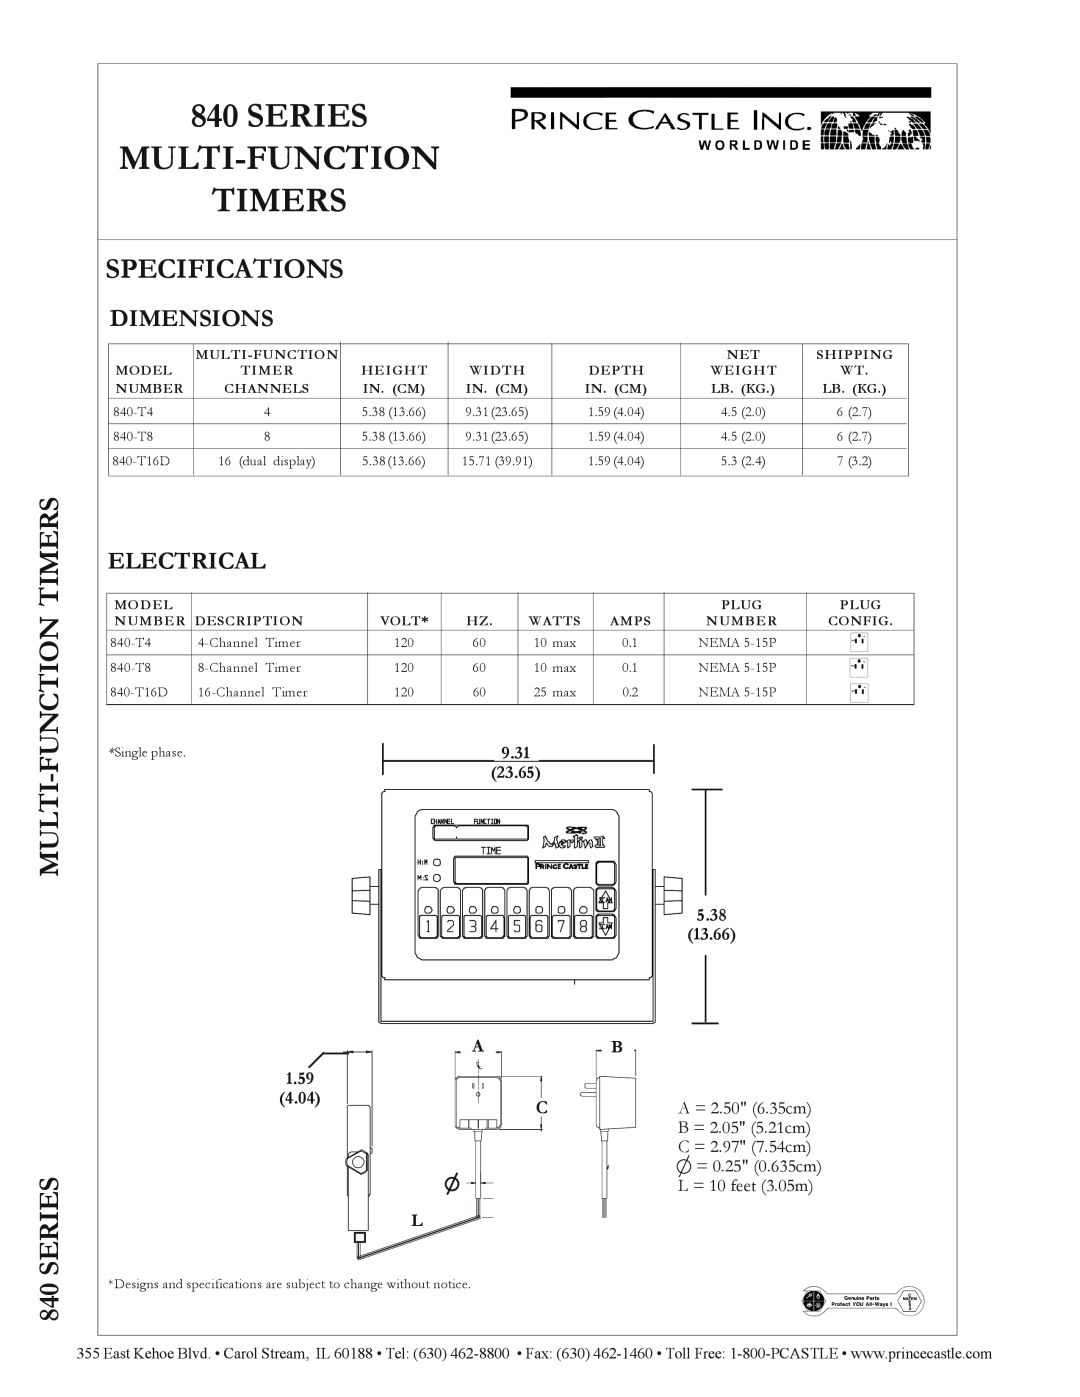 Prince Castle 840-T16D Specifications, Series Multi-Function Timers, Dimensions, Electrical, 9.31, 1.59 4.04 